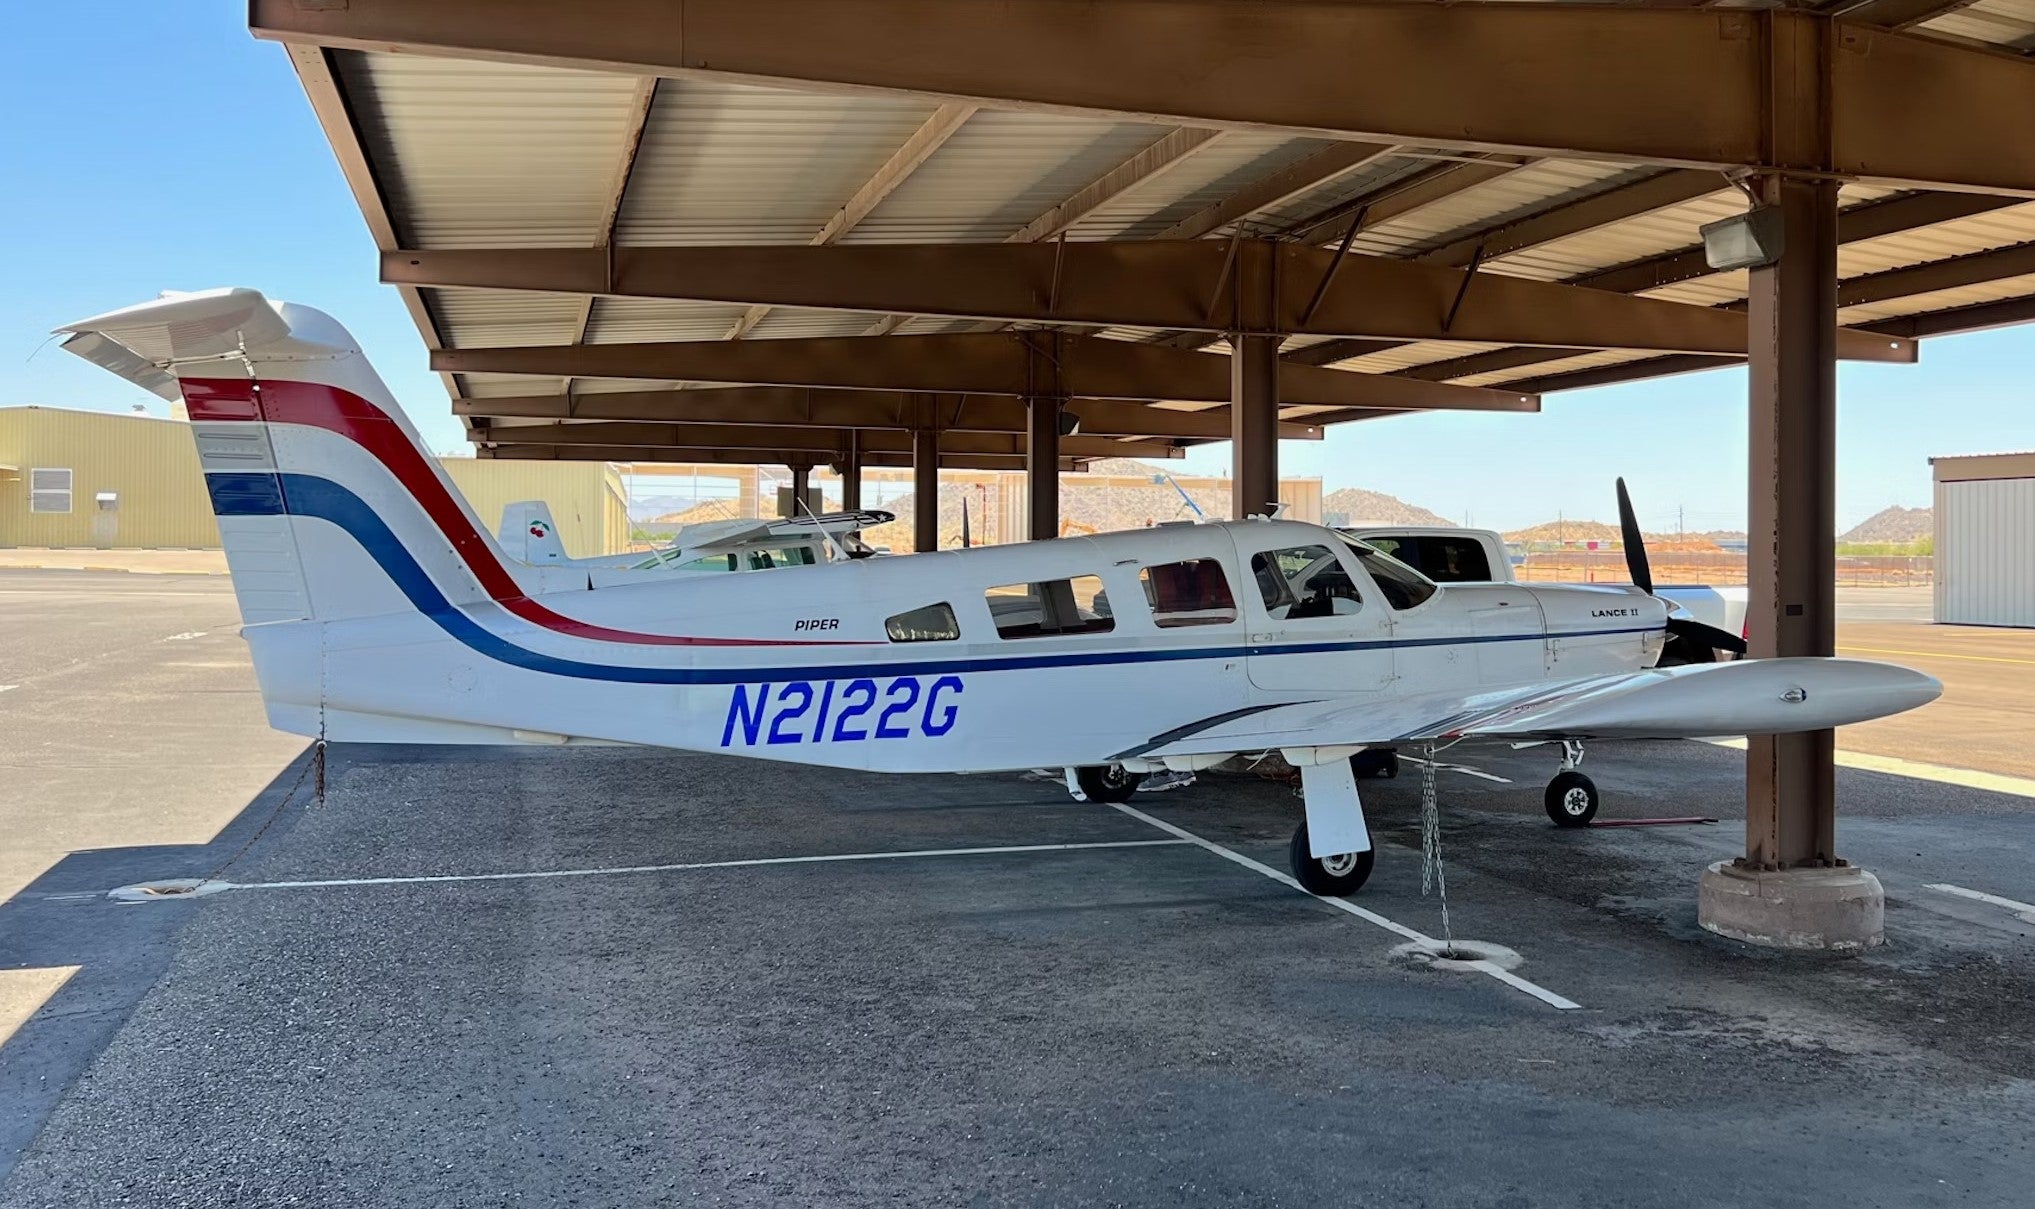 1978 Piper PA-32RT-300 Lance II Is a load-lifting ‘Aircraft For Sale’ Top Pick 